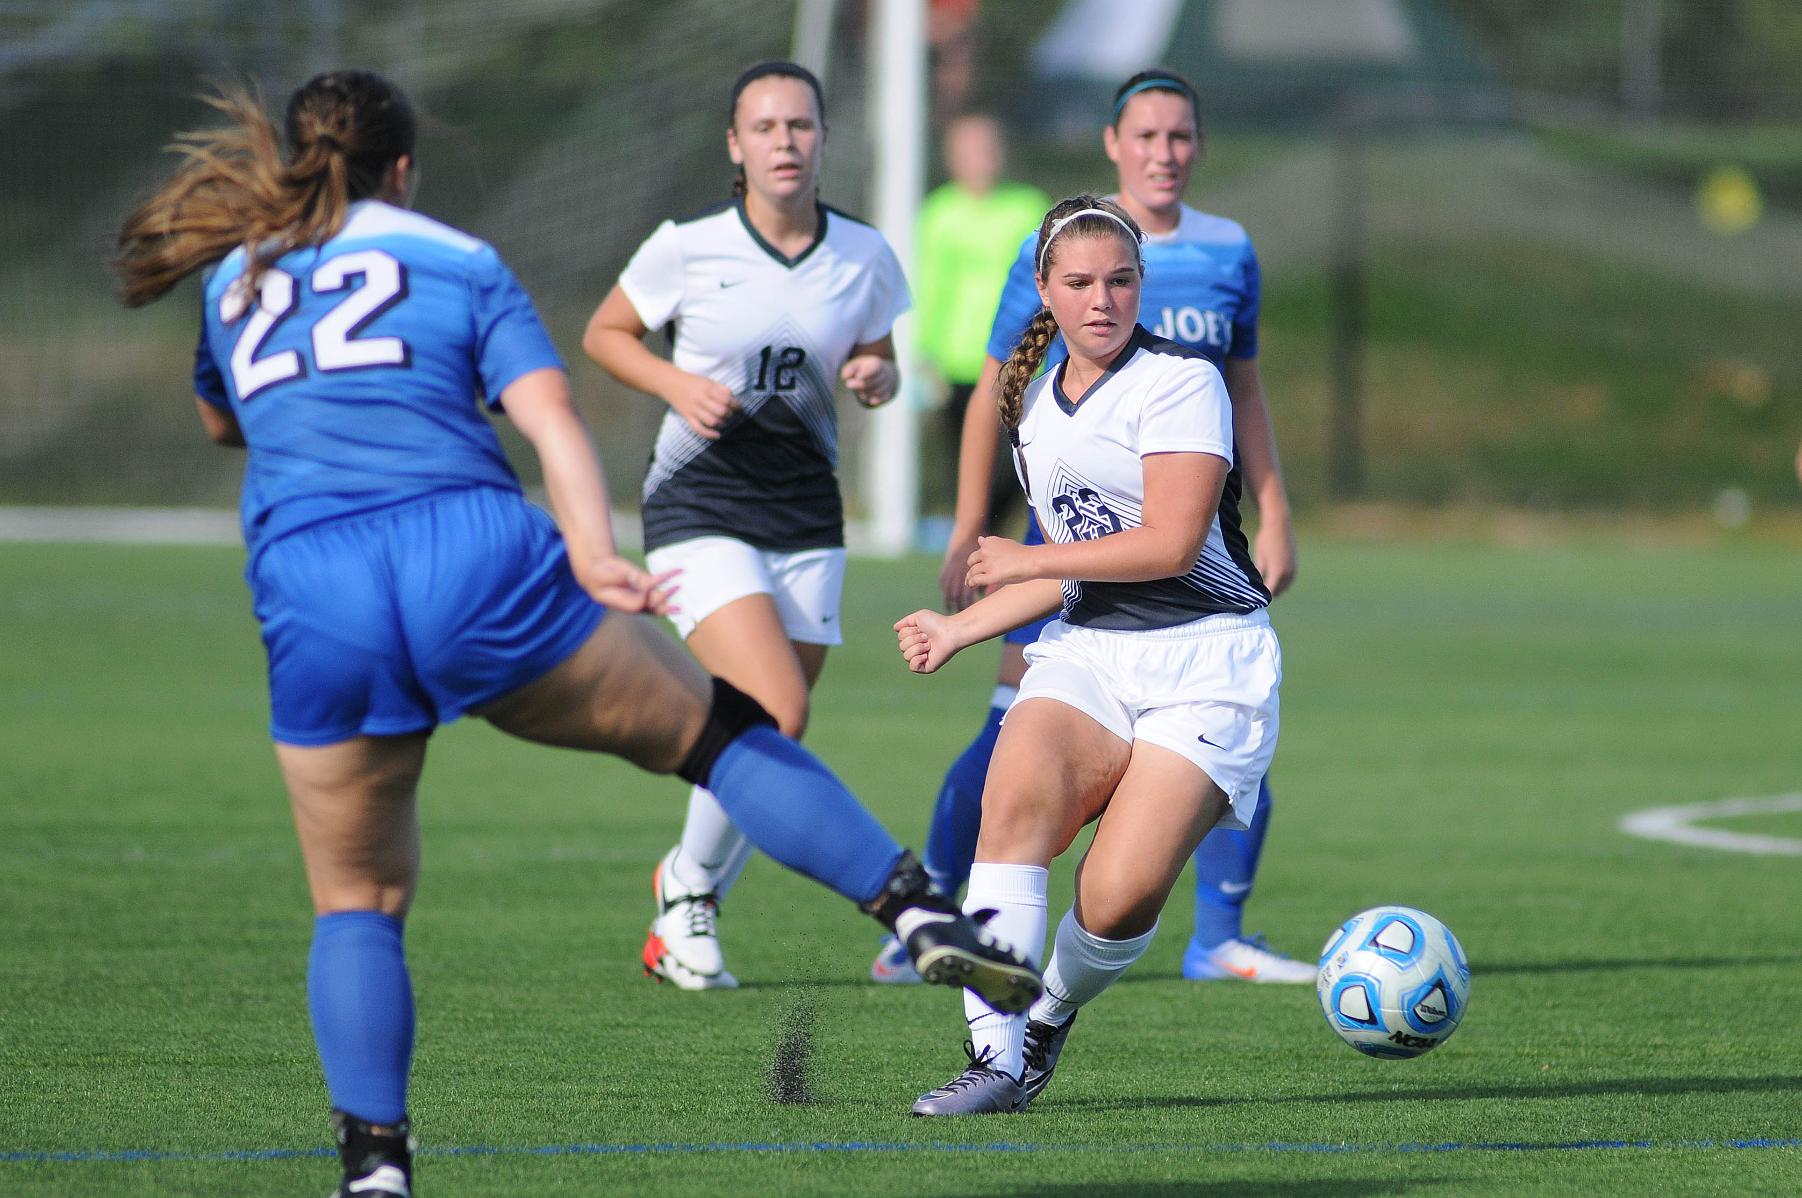 Women's Soccer: Raiders blanked by Suffolk, 5-0